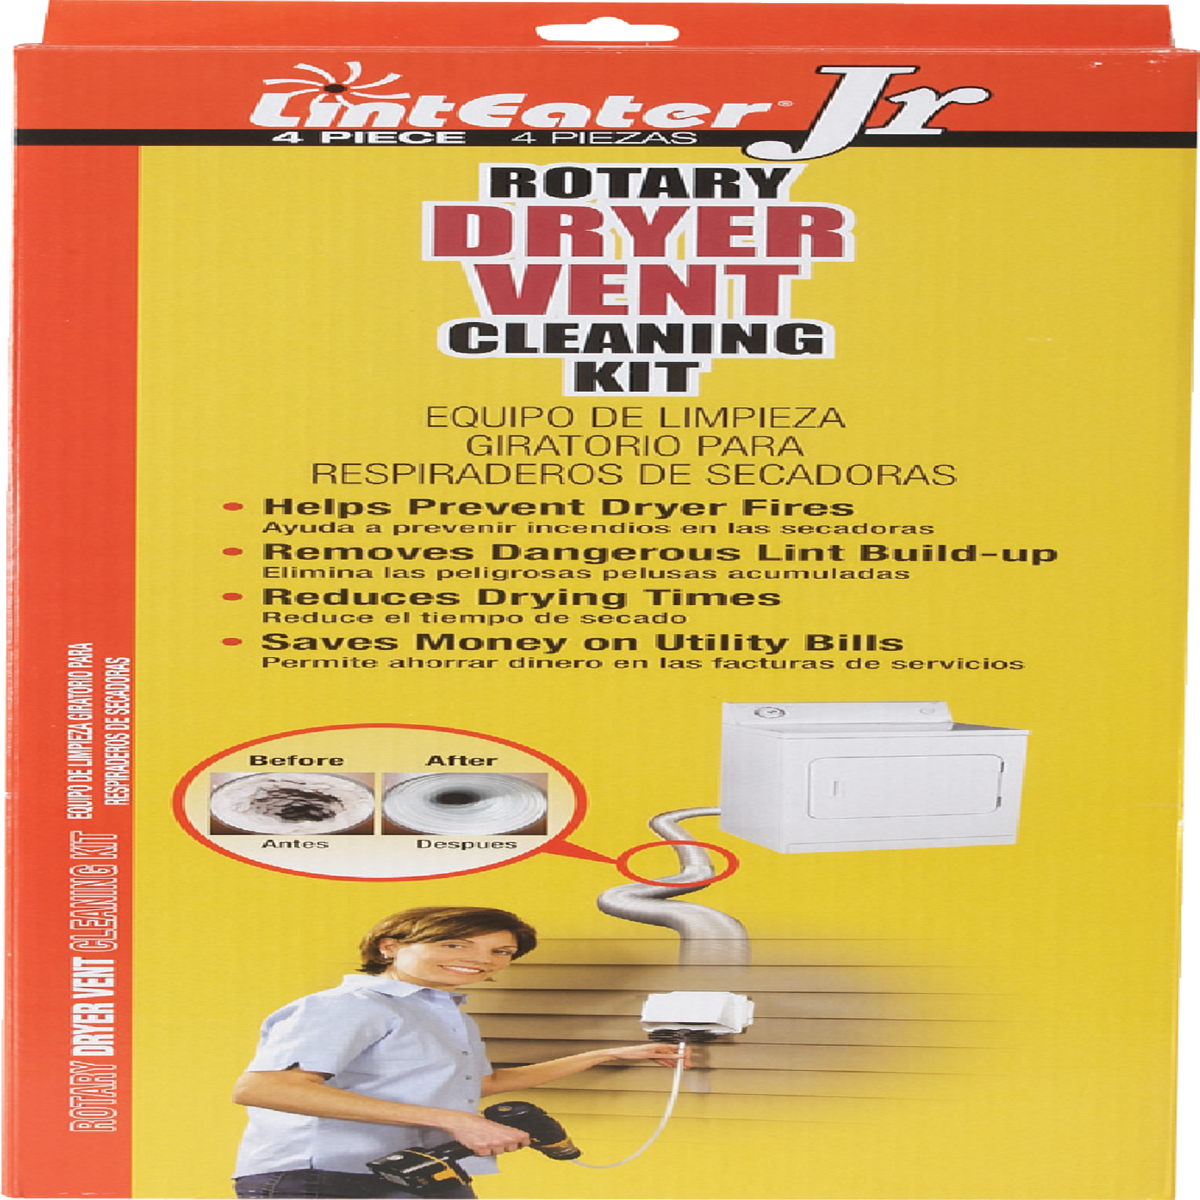 Clothes Dryer Vent Cleaning Kit